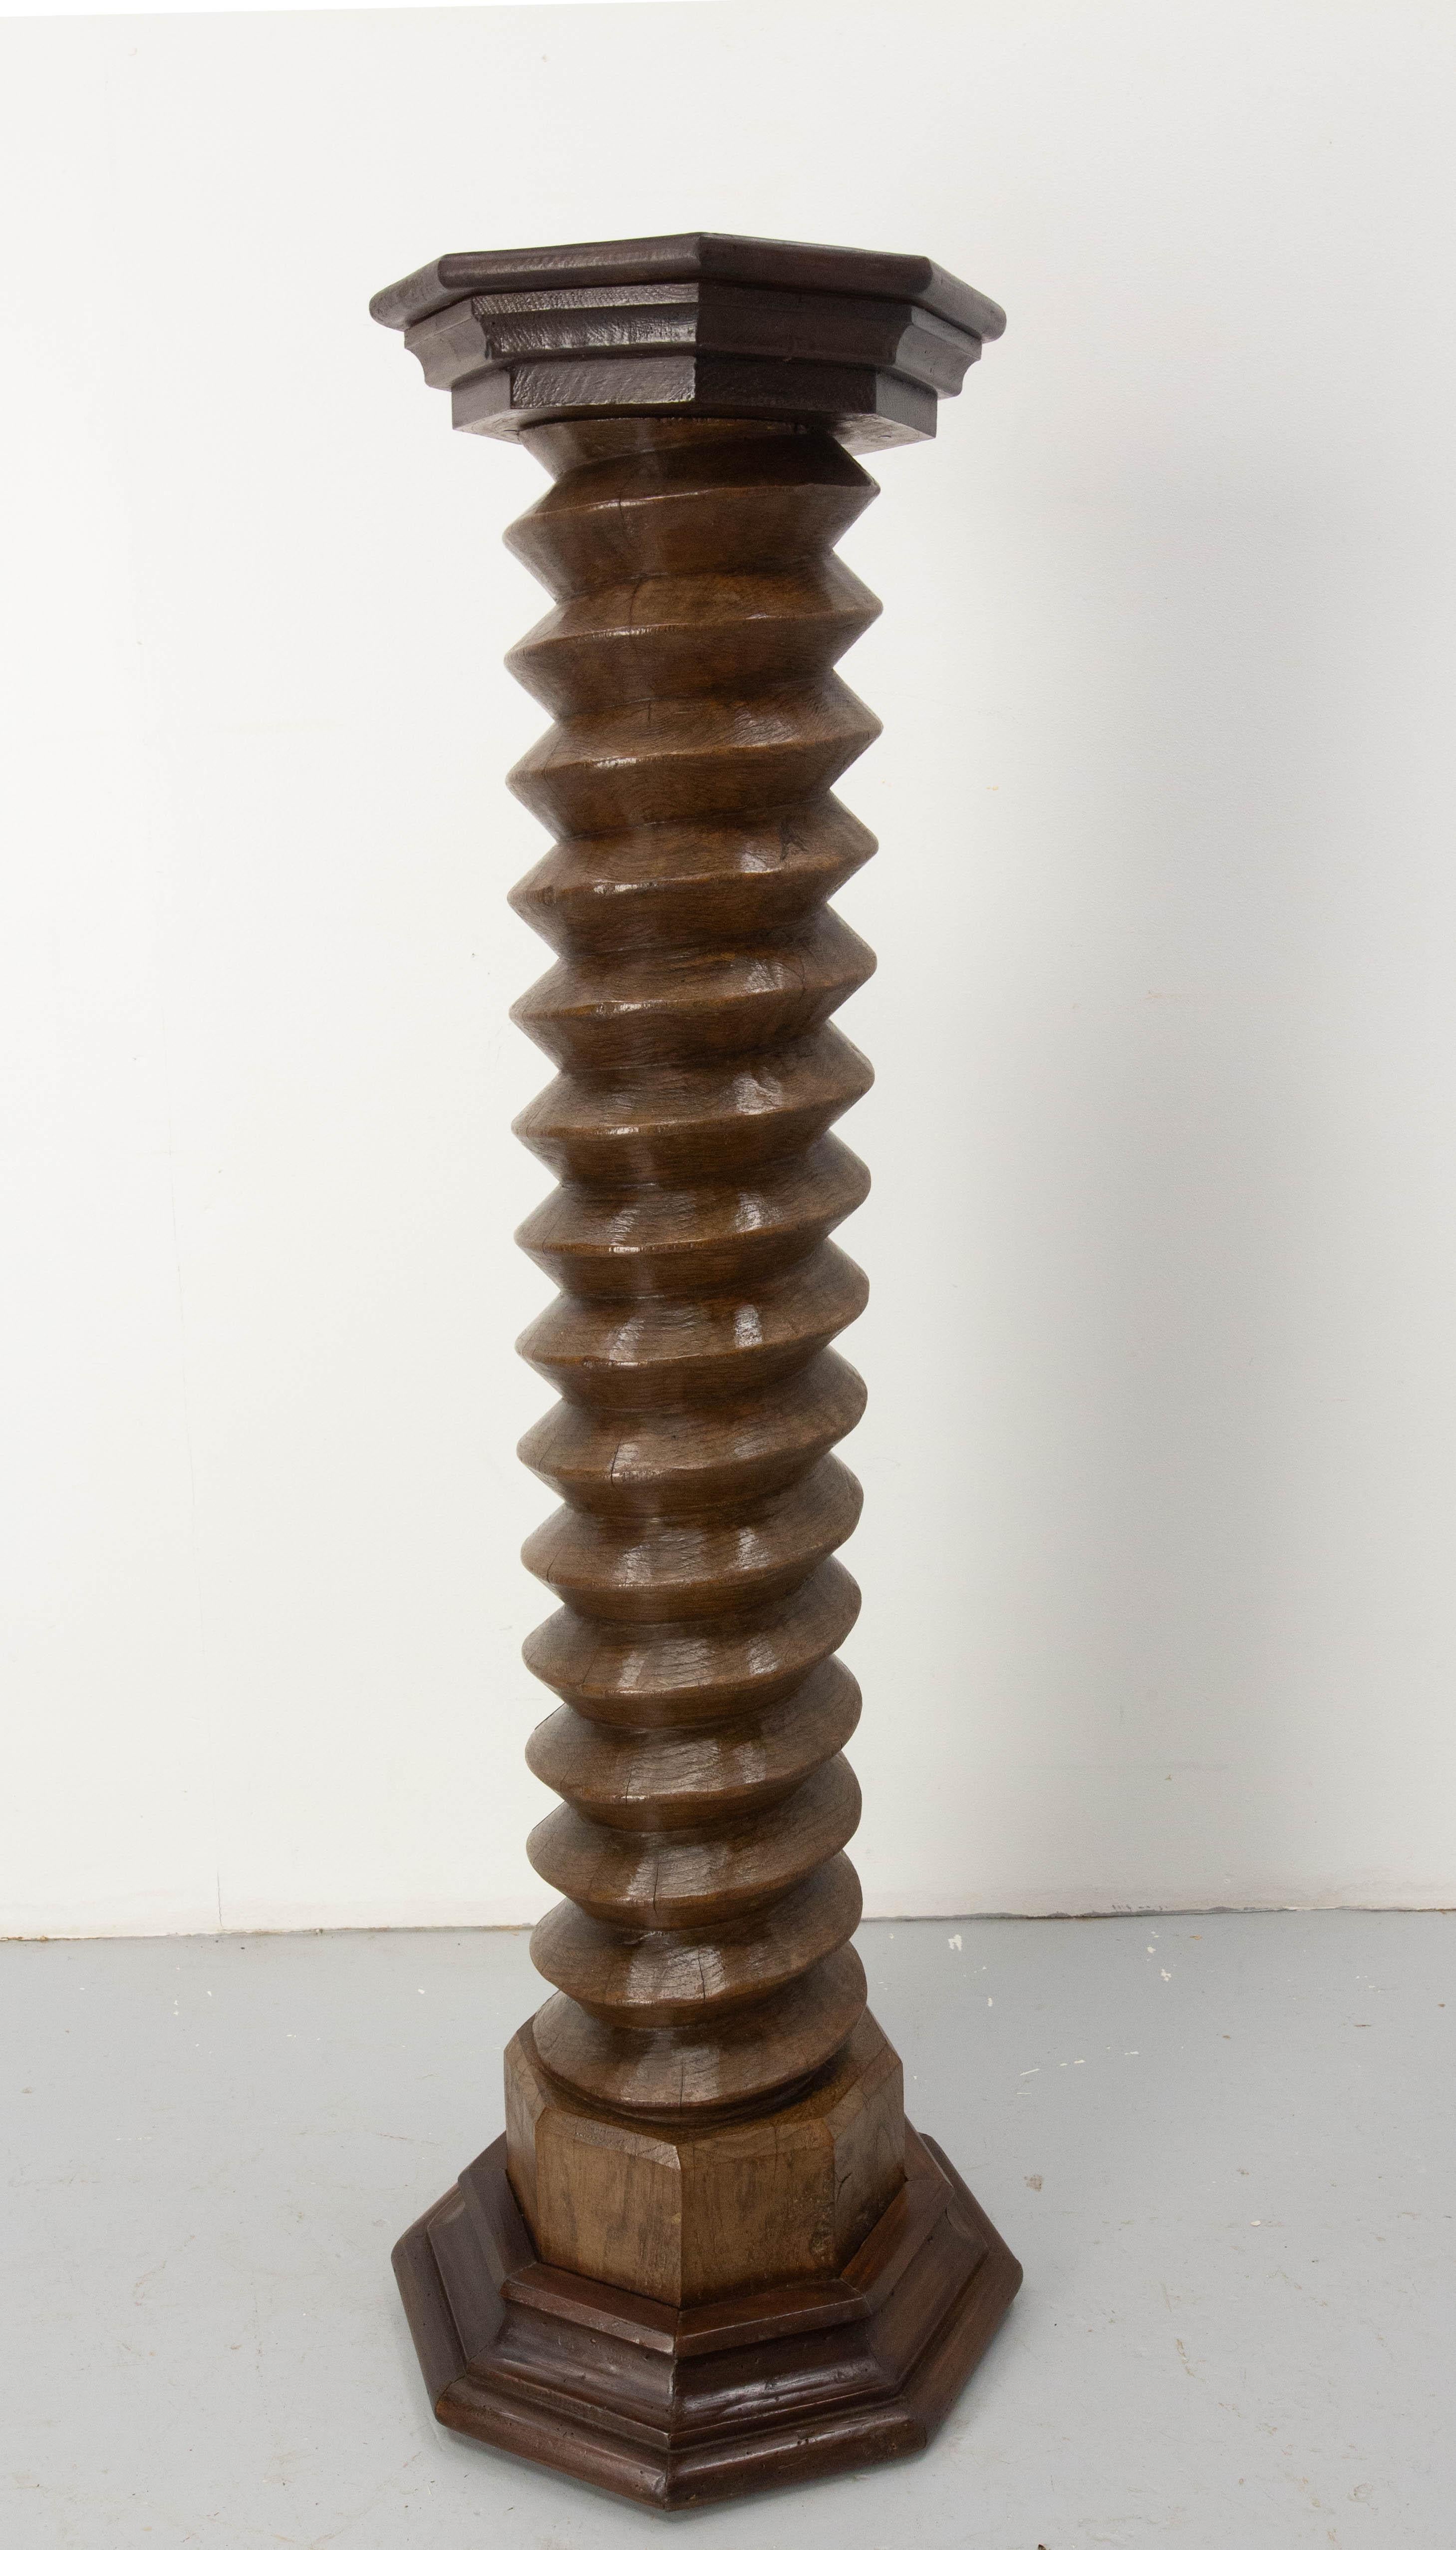 French pedestal wine press screw, 19th century.
Brutalist style with octogonal base and top.
Dimension of the base : 14.17 in. x 14.17 in. (36 x 36 cm)
Dimension of the top : 11.41 in. x 11.41 in. (29 x 29 cm)
Good antique condition
Solid and